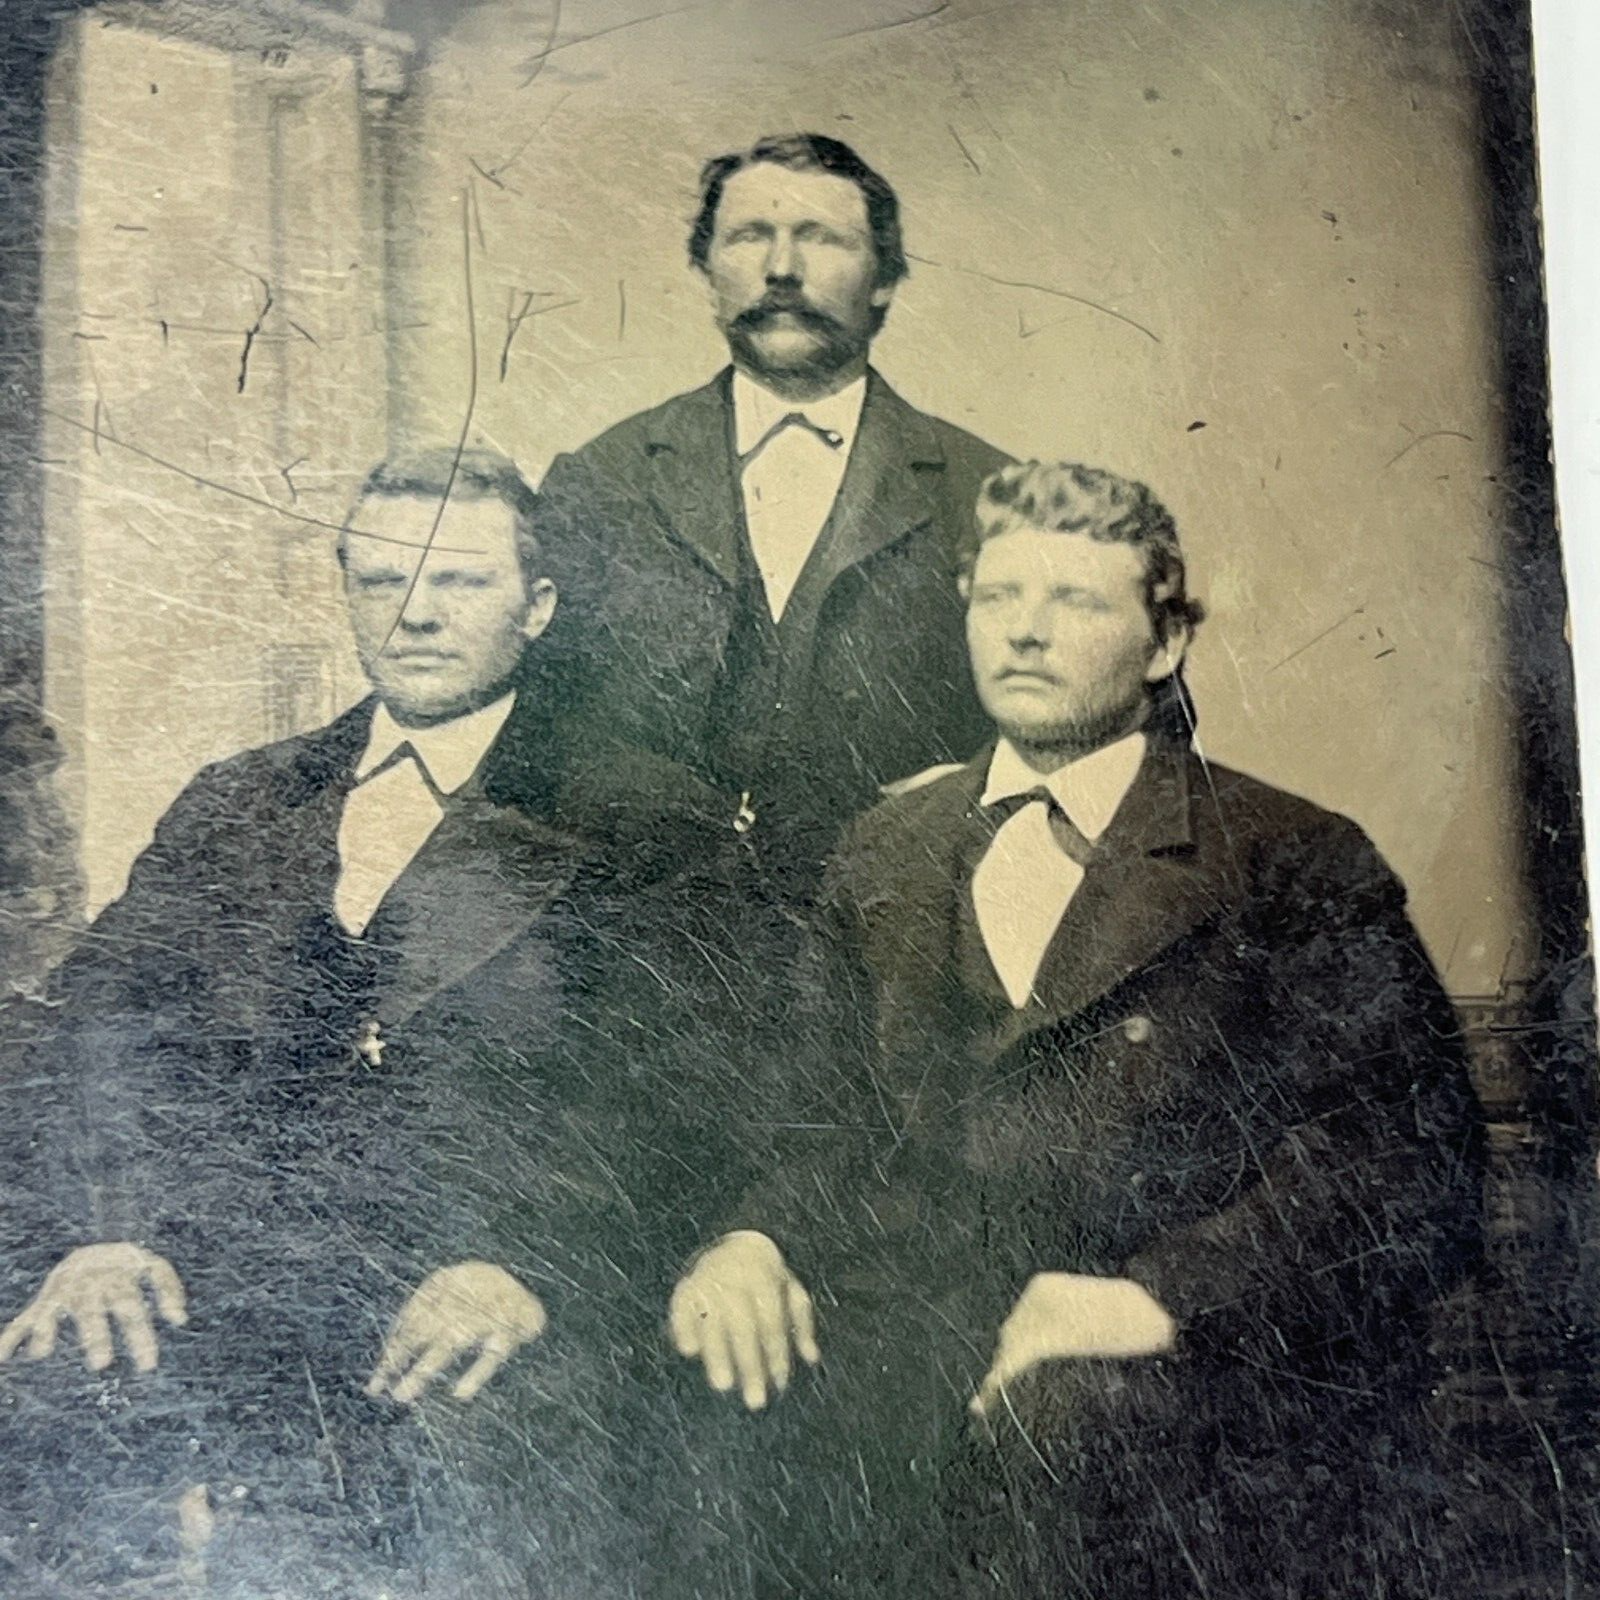 Tintype 3 Adult Business Men Suits and Ties Possibly Brothers 3.75X2.5In.(D)